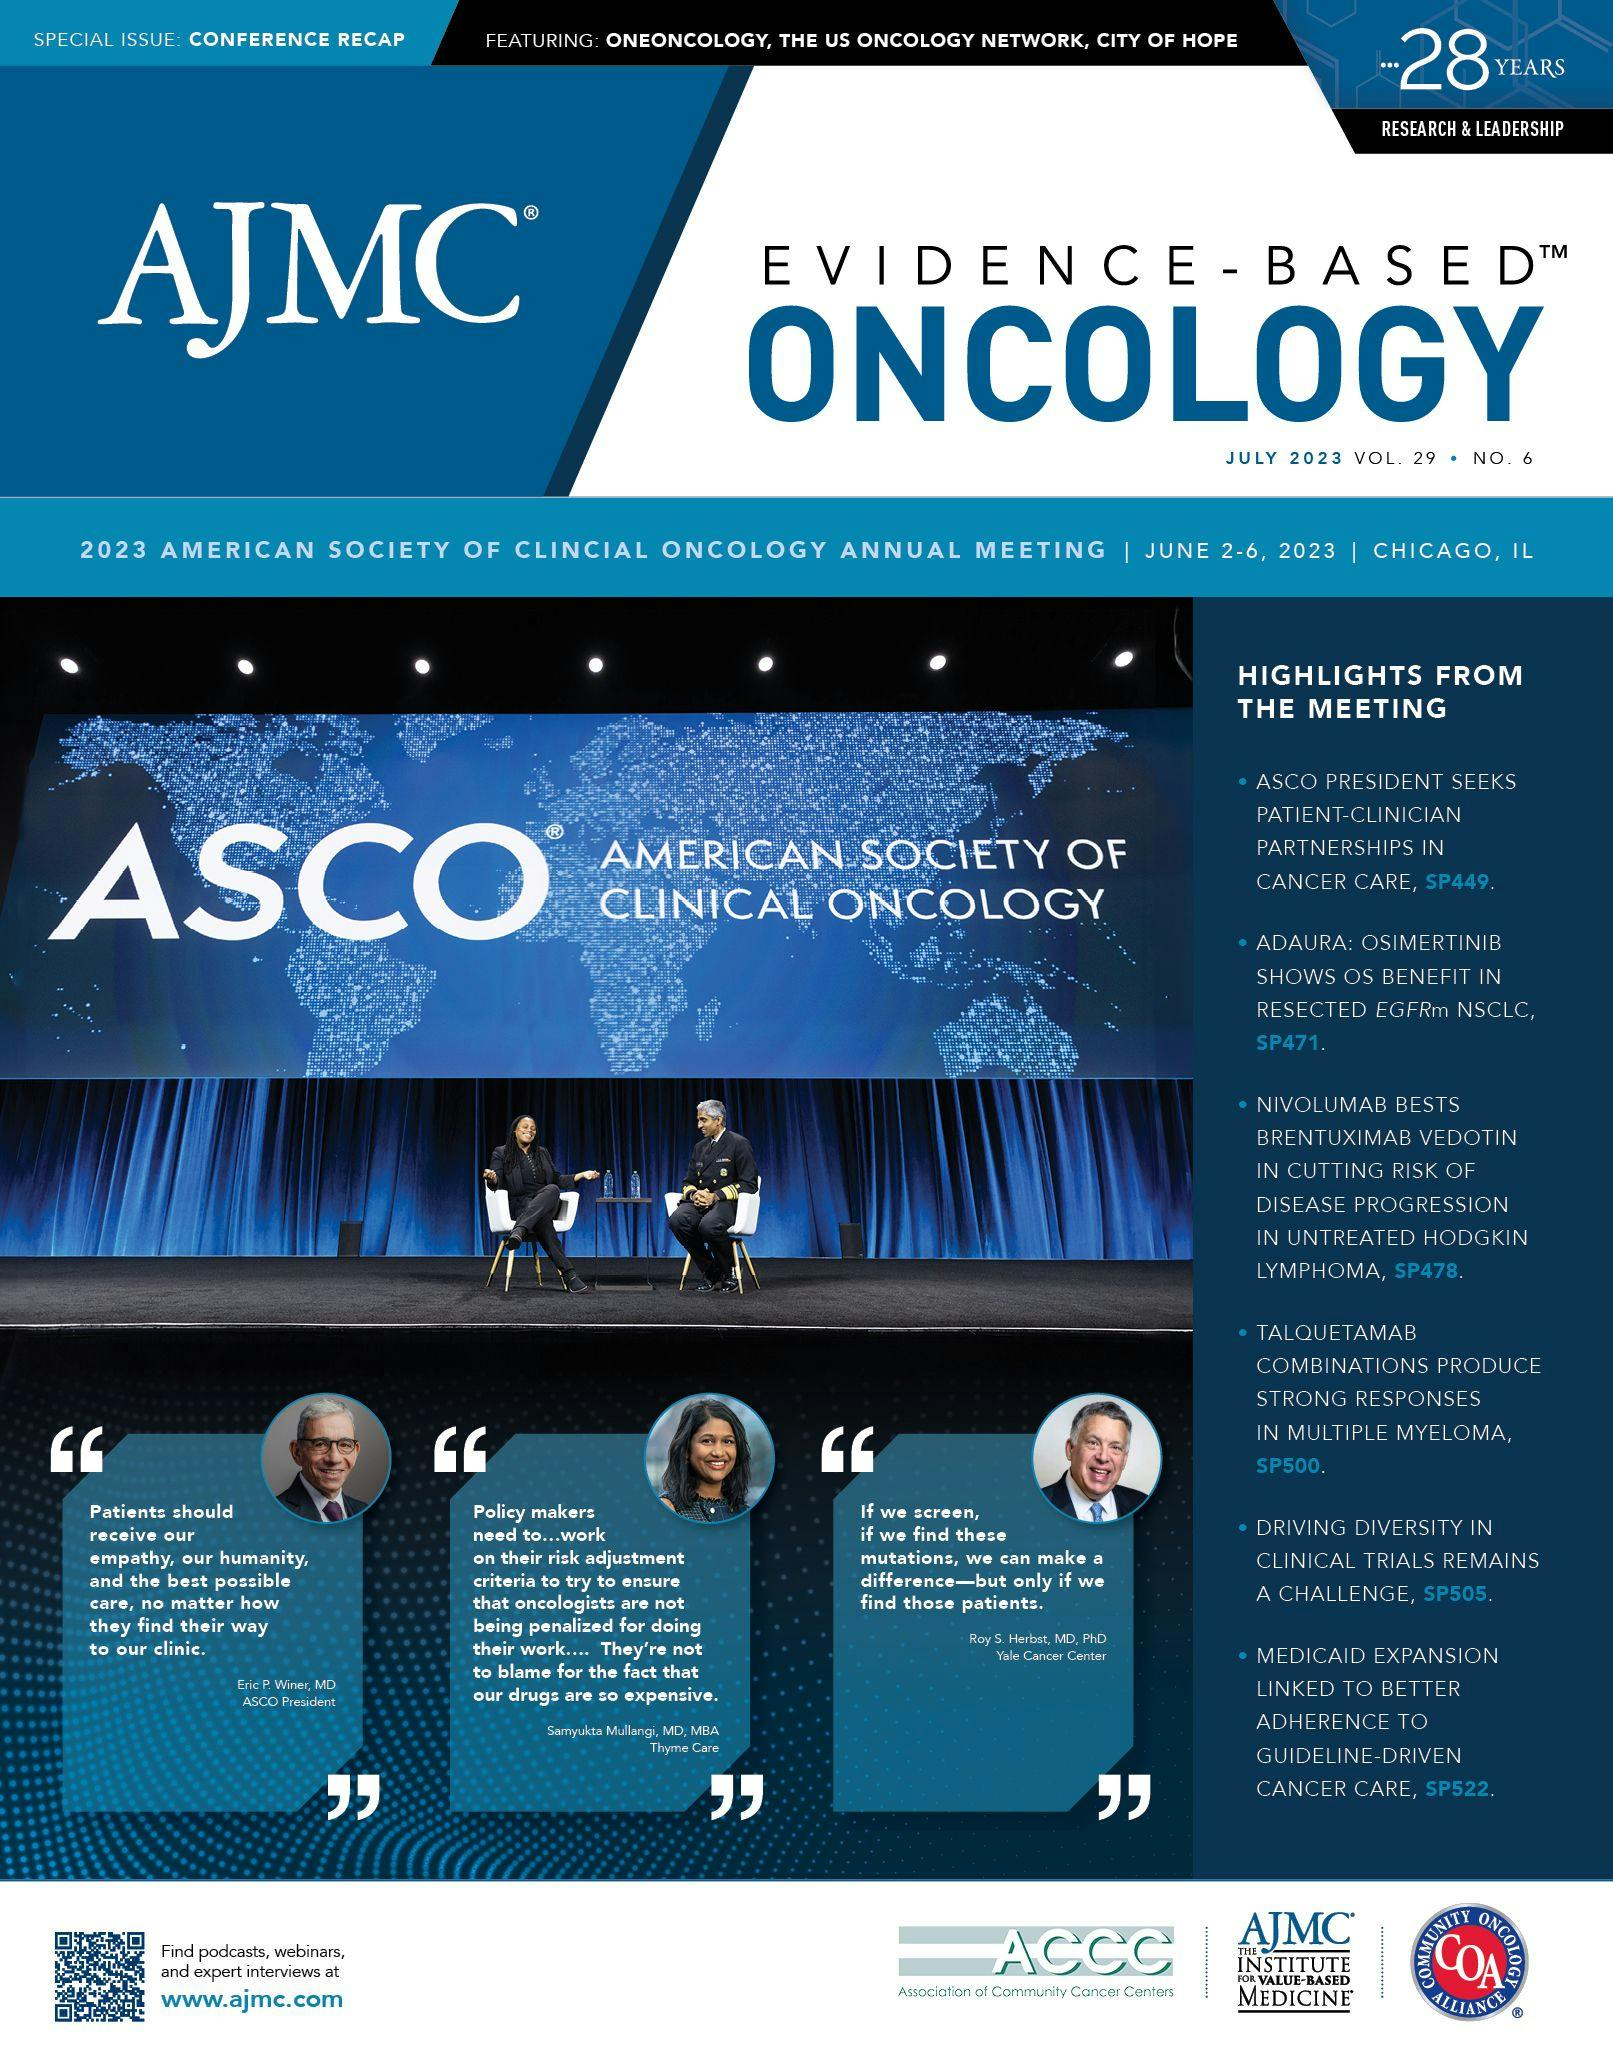 July 2023 Evidence-Based Oncology cover